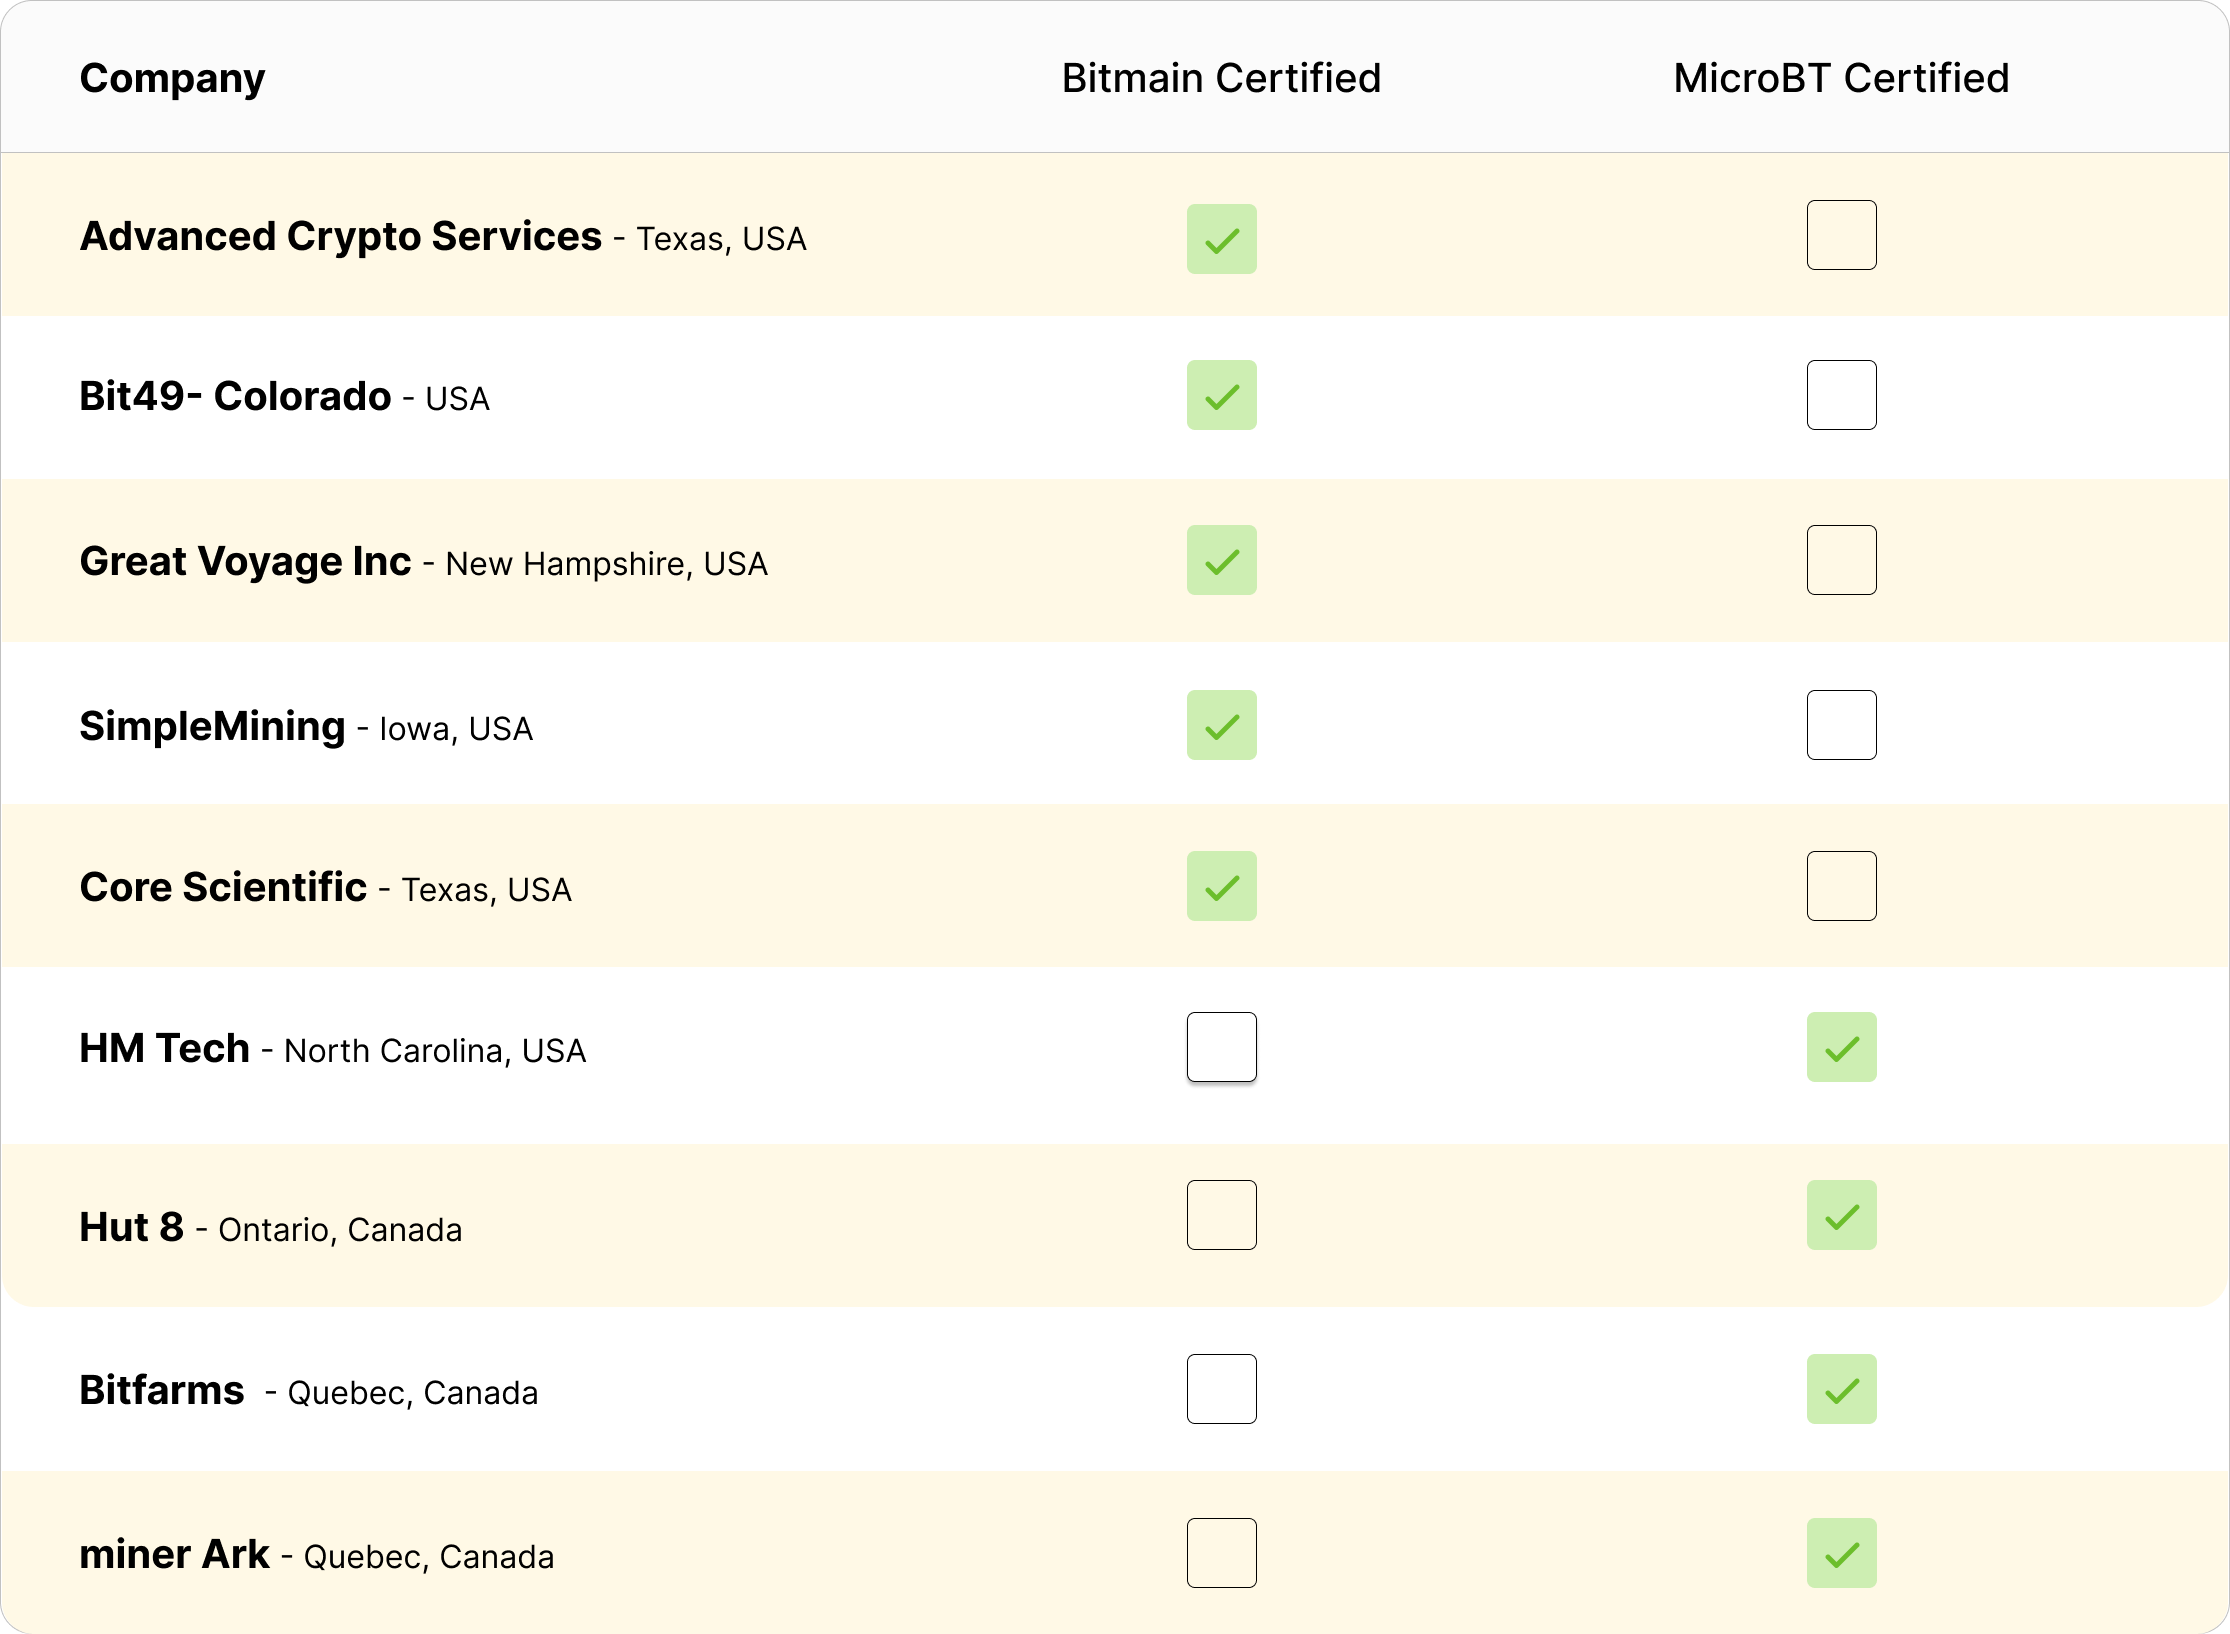 Certified Bitmain and MicroBT repair centers in the US and Canada | Source: Hashrate Index, company websites 